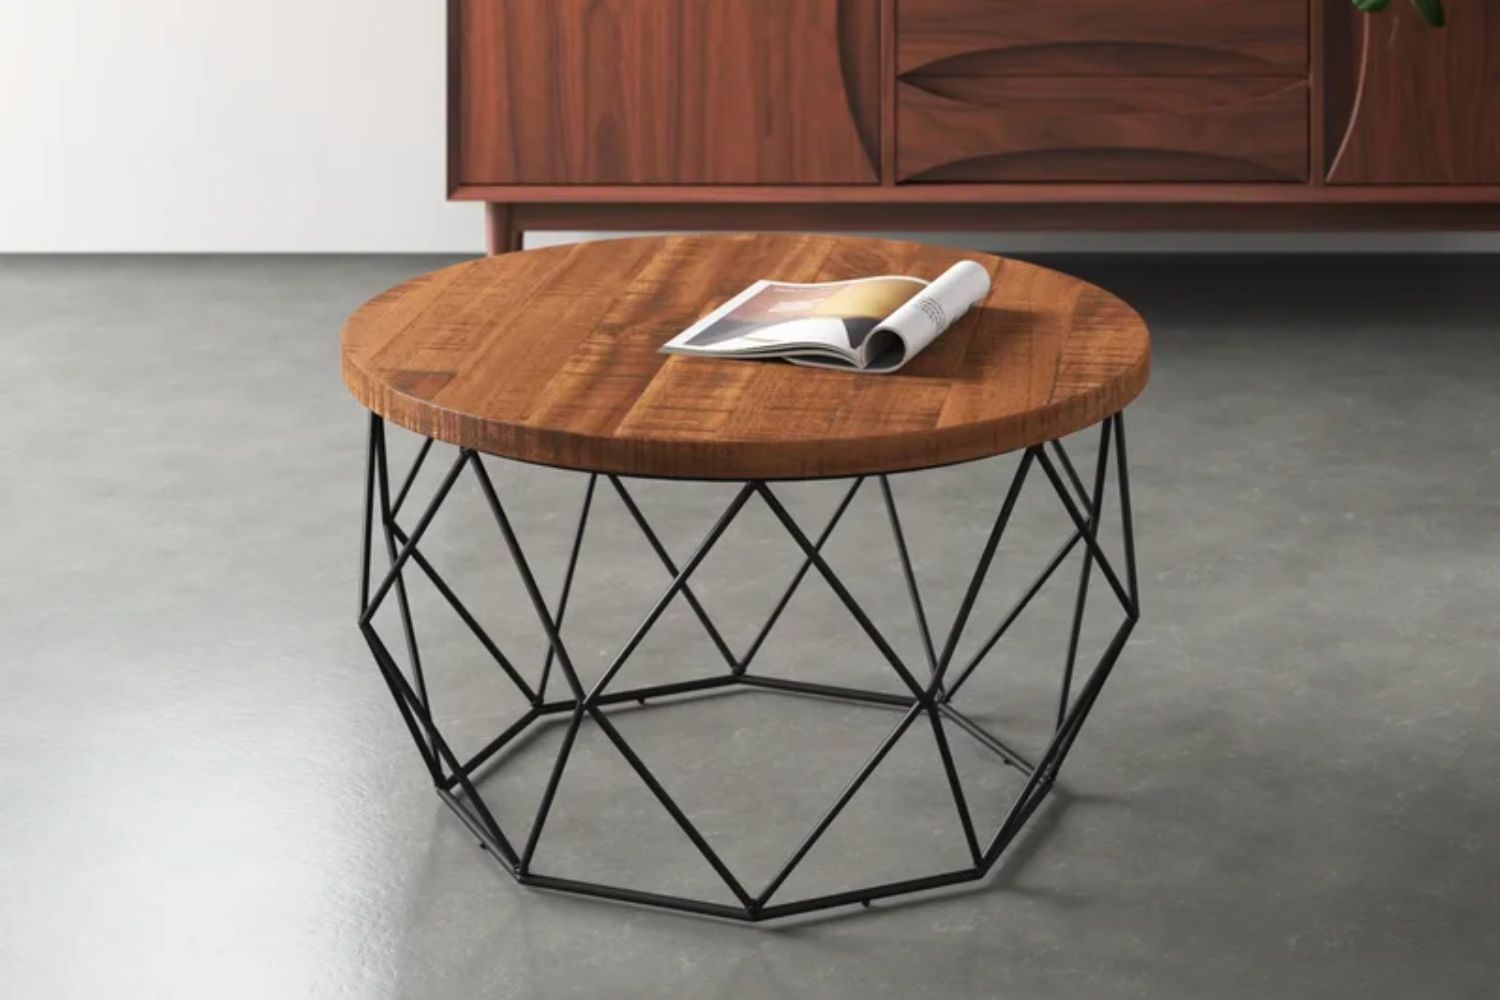 Deals Roundup Cyber Monday Furniture 11/29: Mercury Row Ahart Frame Coffee Table